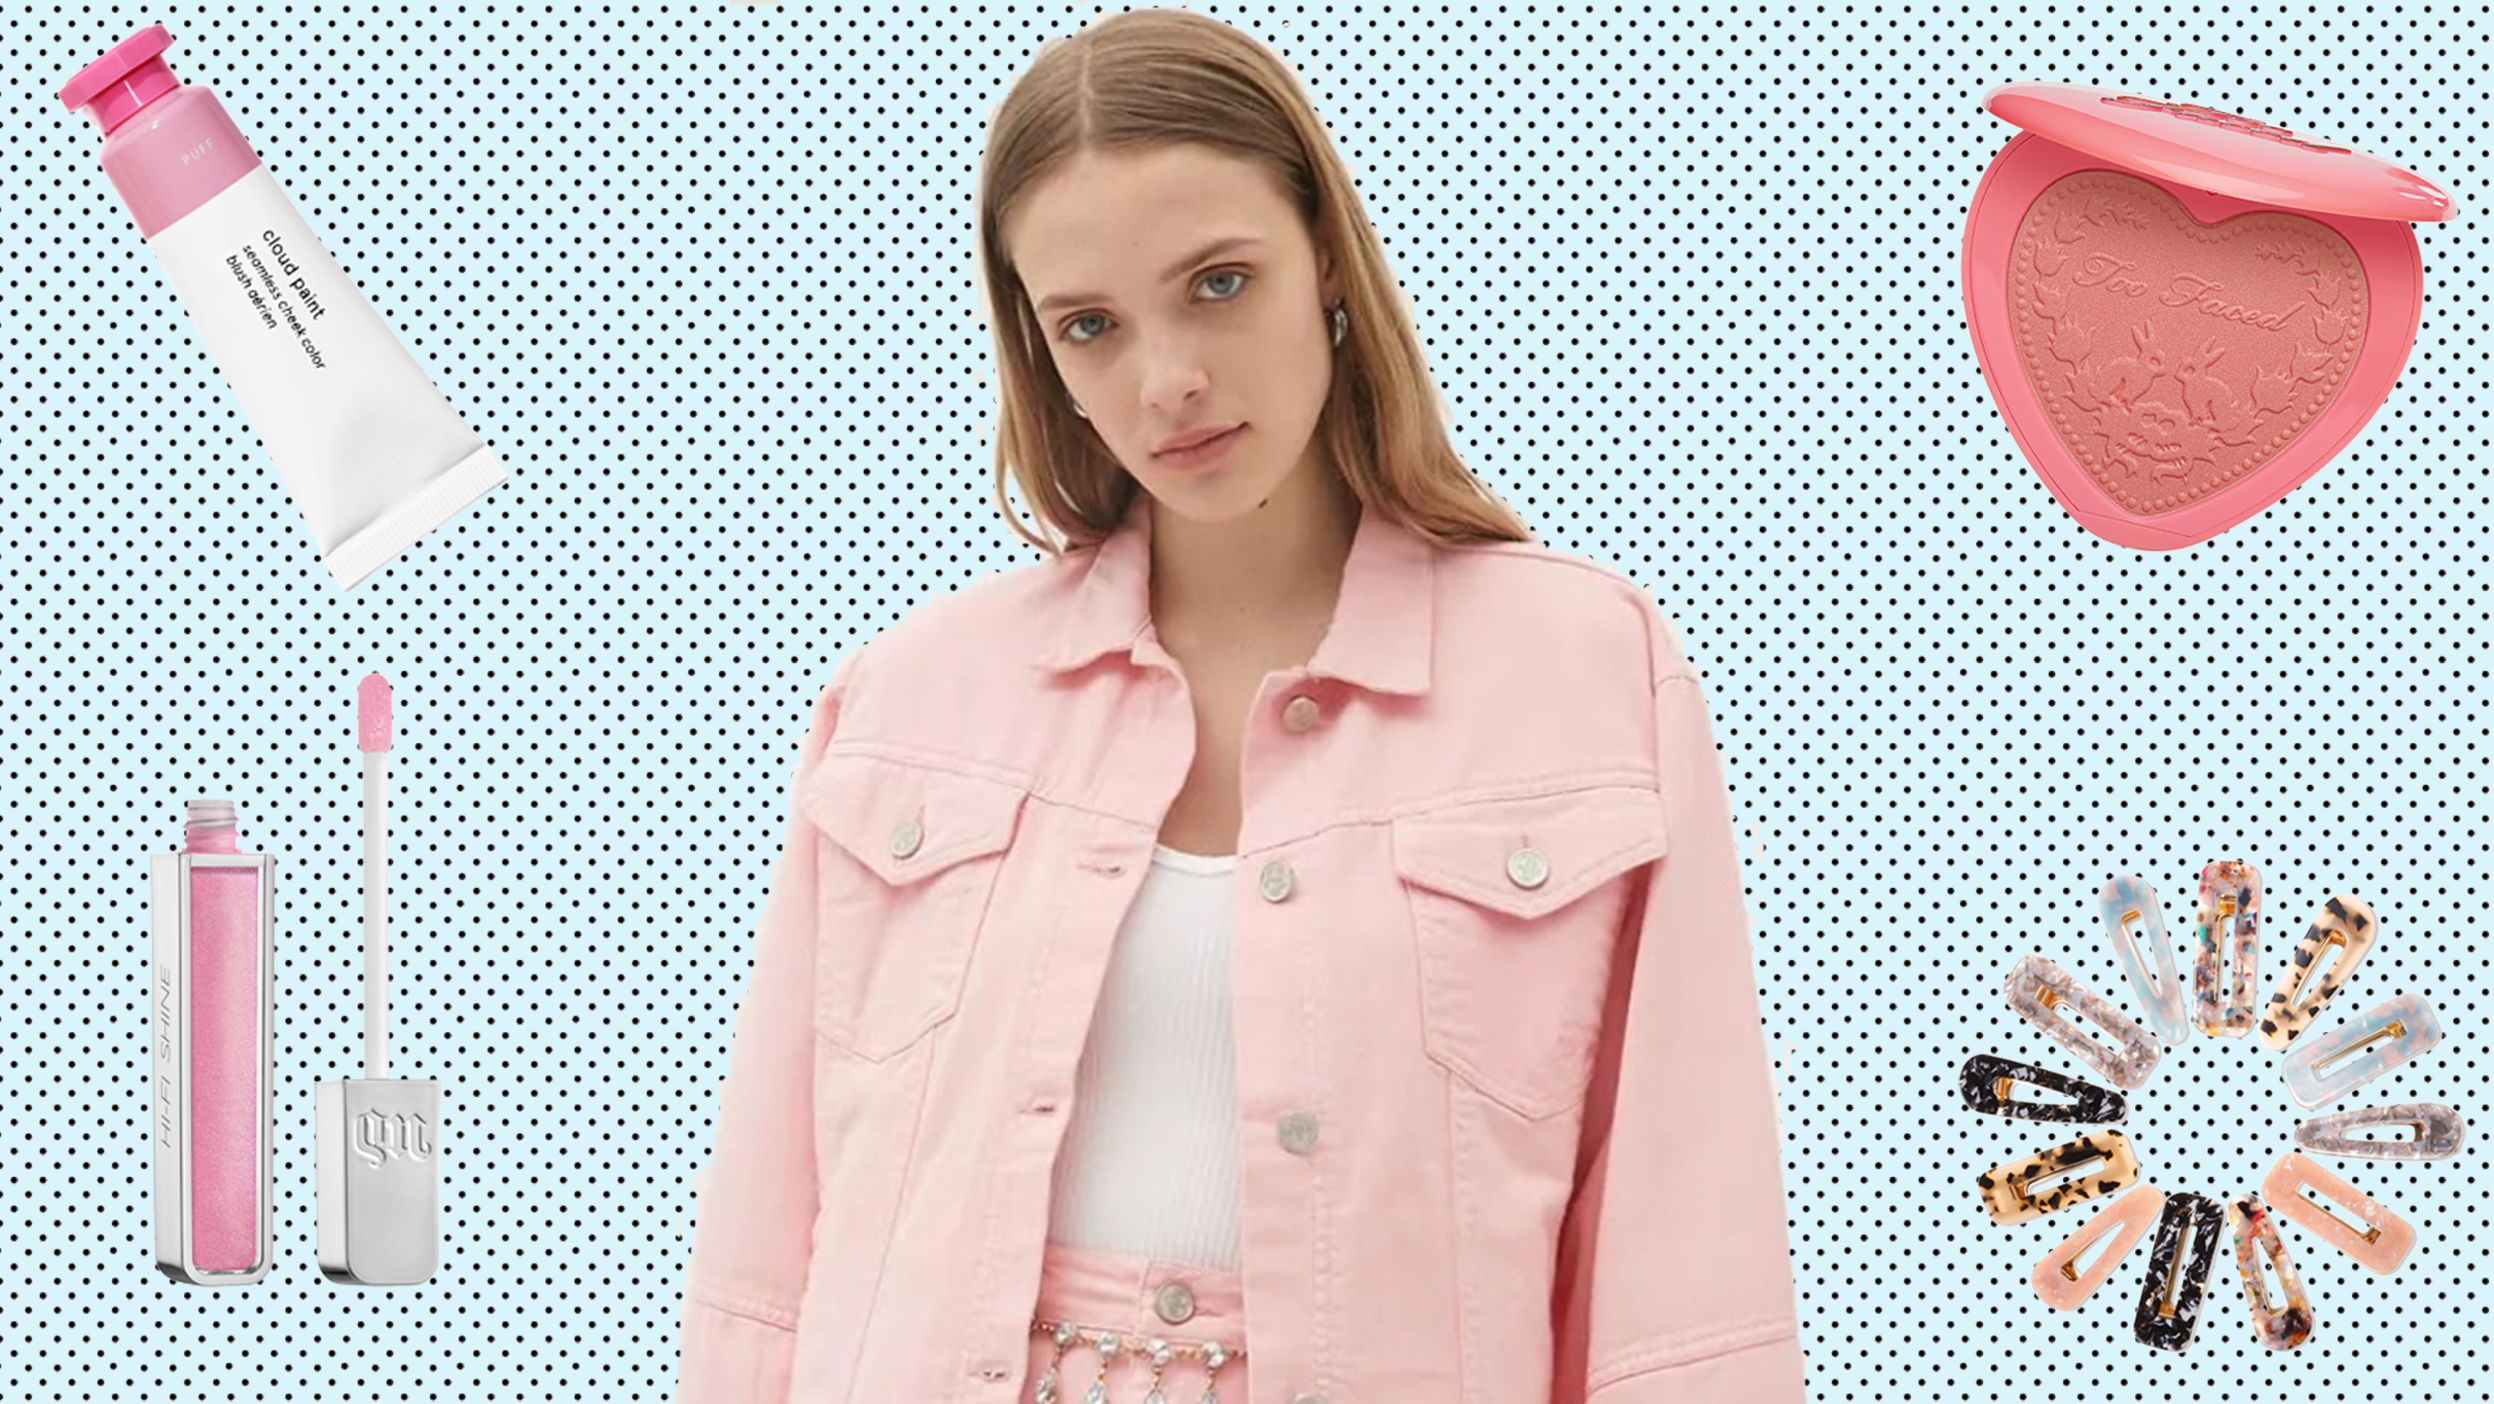 The Soft Girl Aesthetic Is The New Dreamy Trend That's All Over